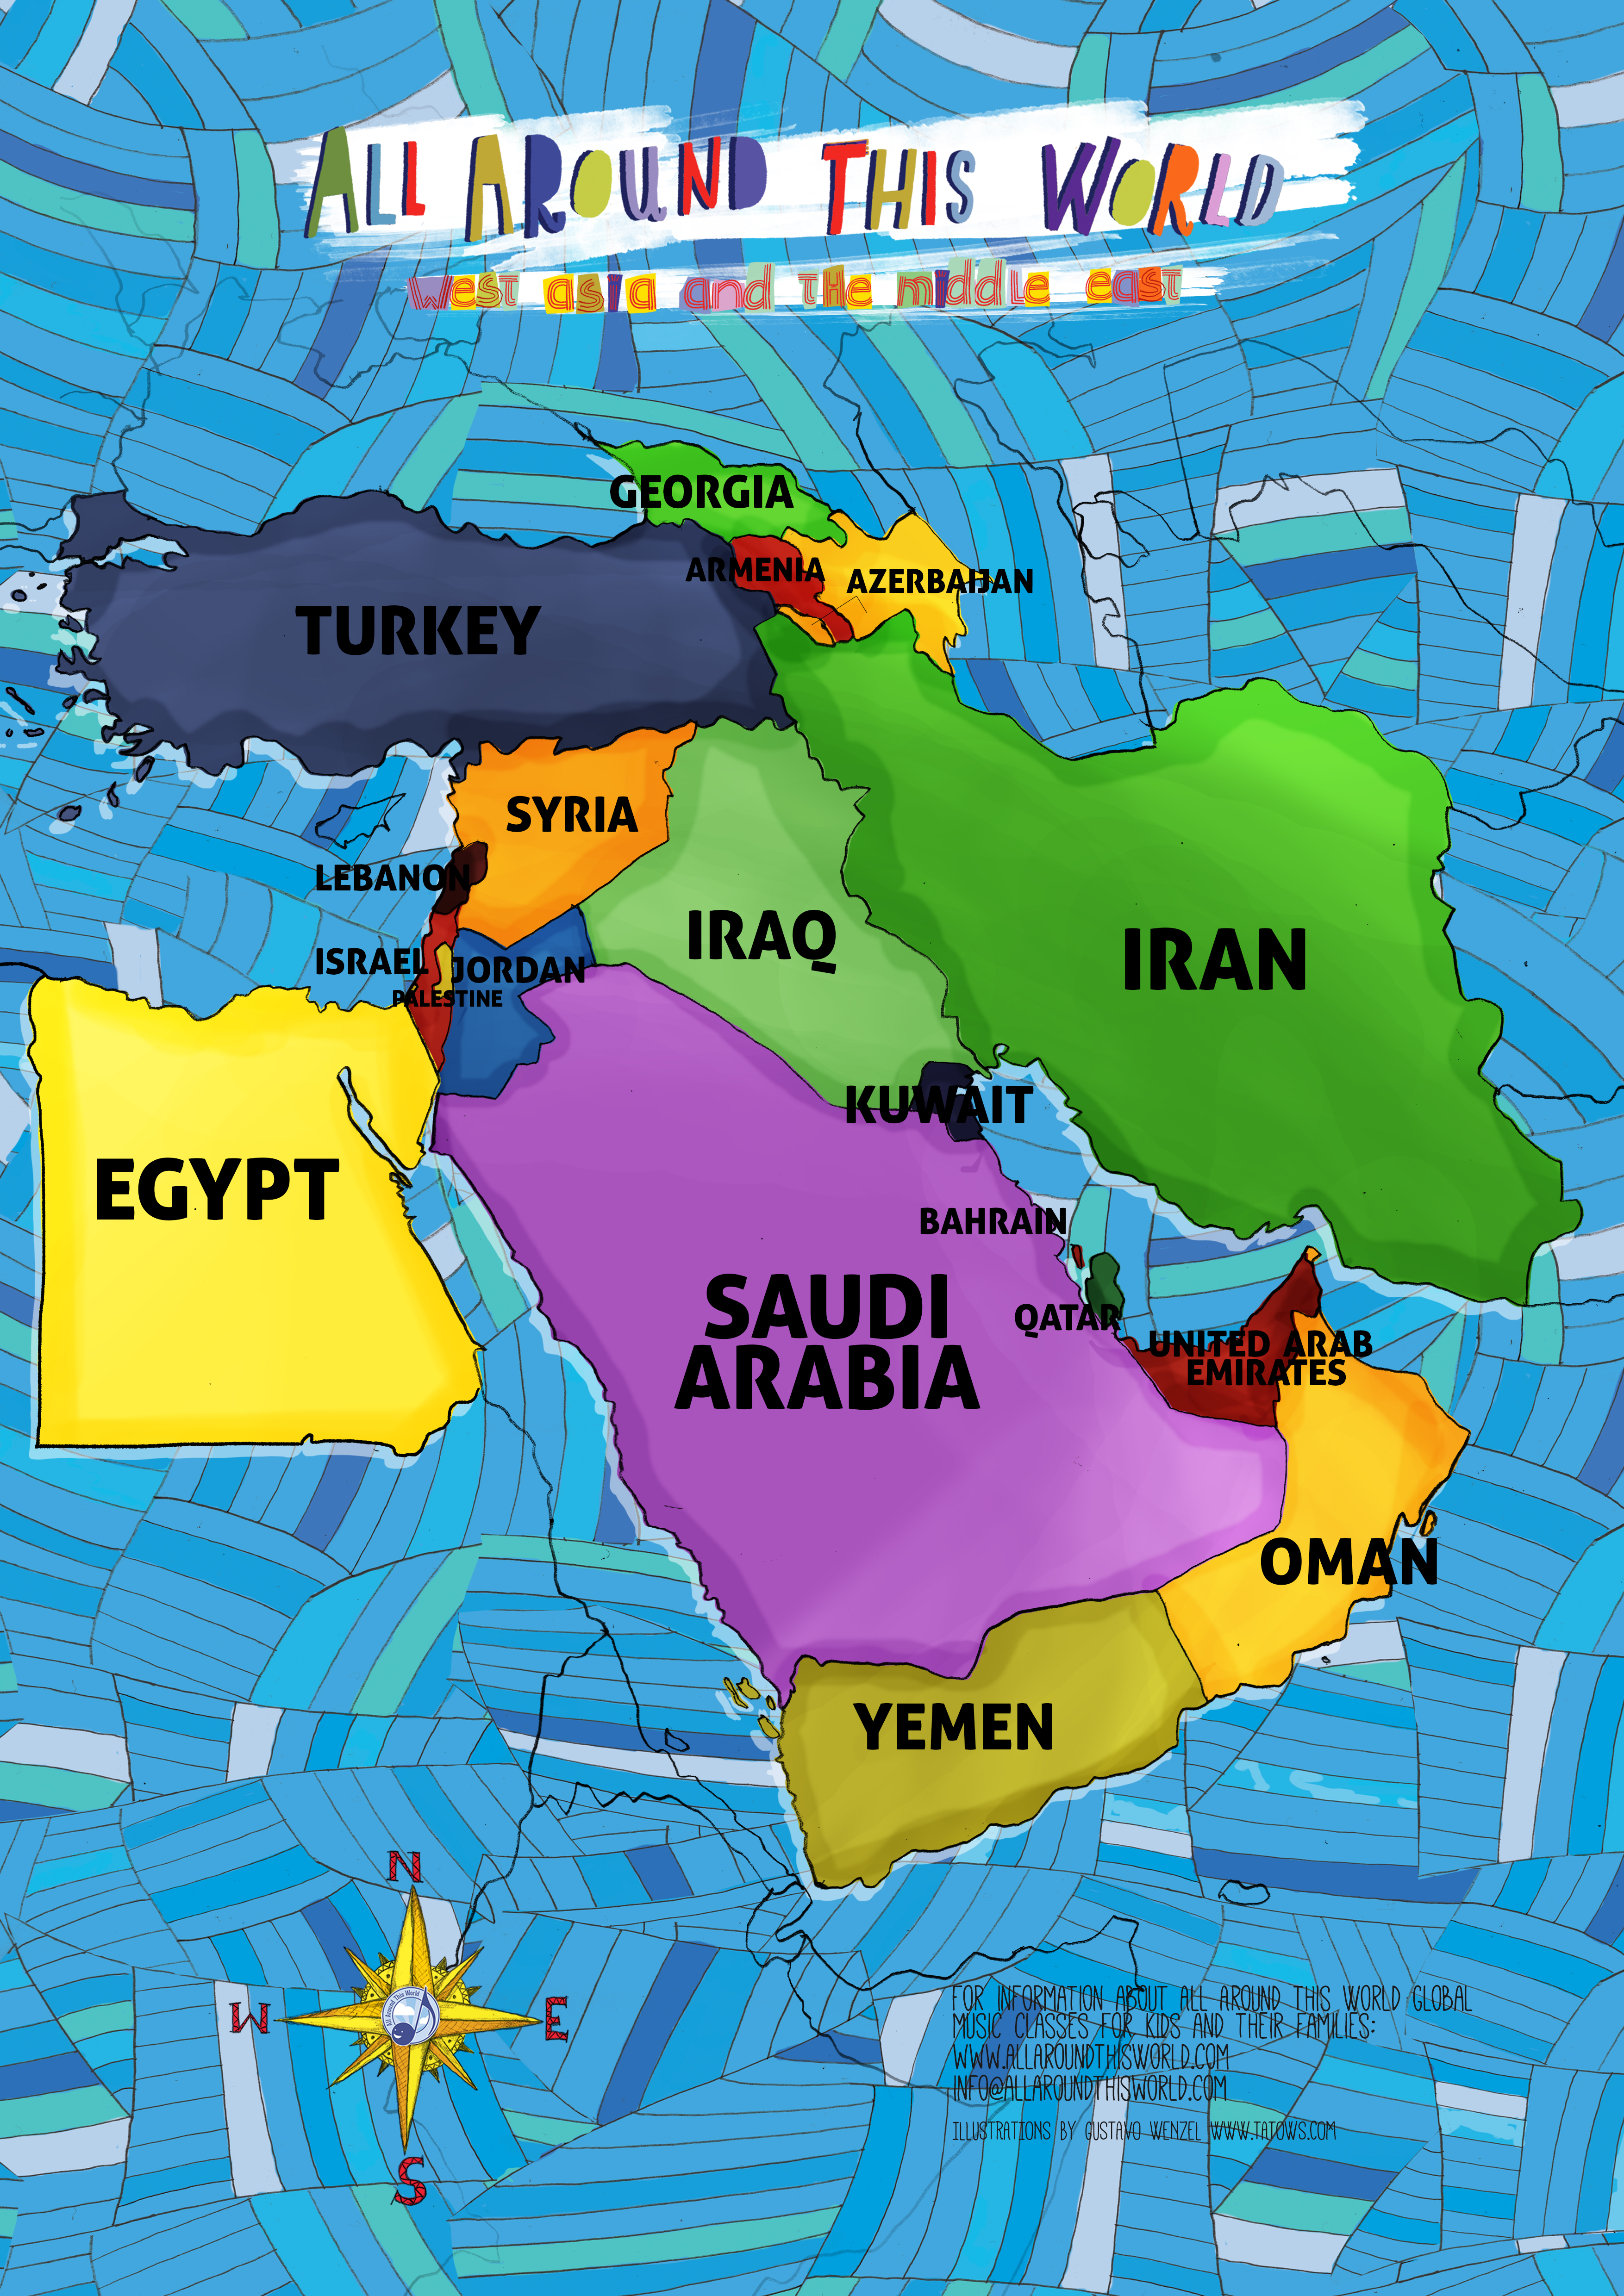 West Asia and the Middle East -- All Around This World